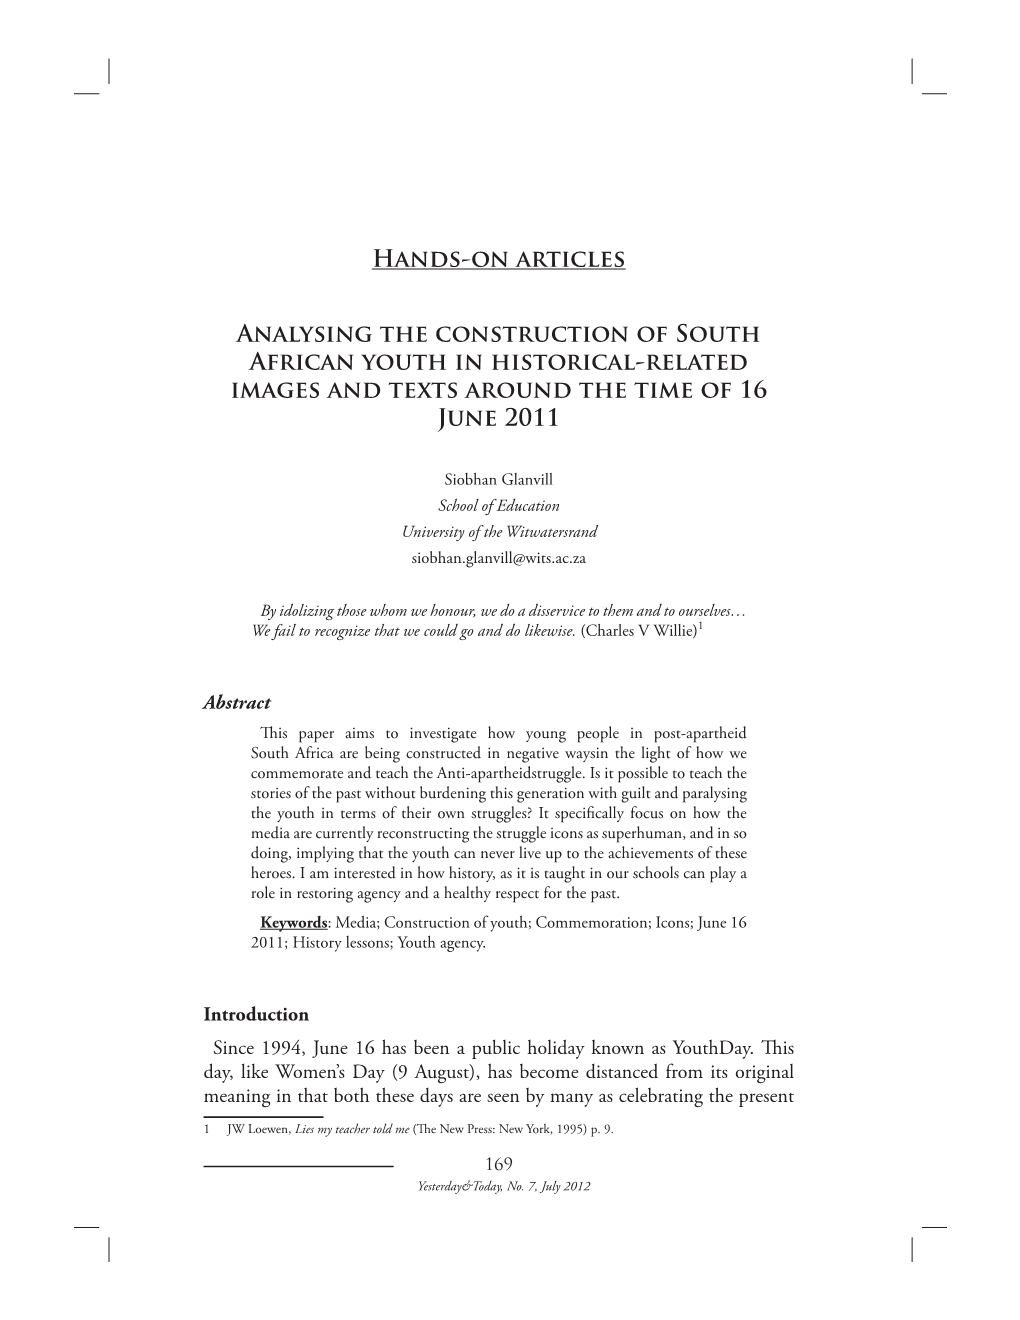 Hands-On Articles Analysing the Construction of South African Youth